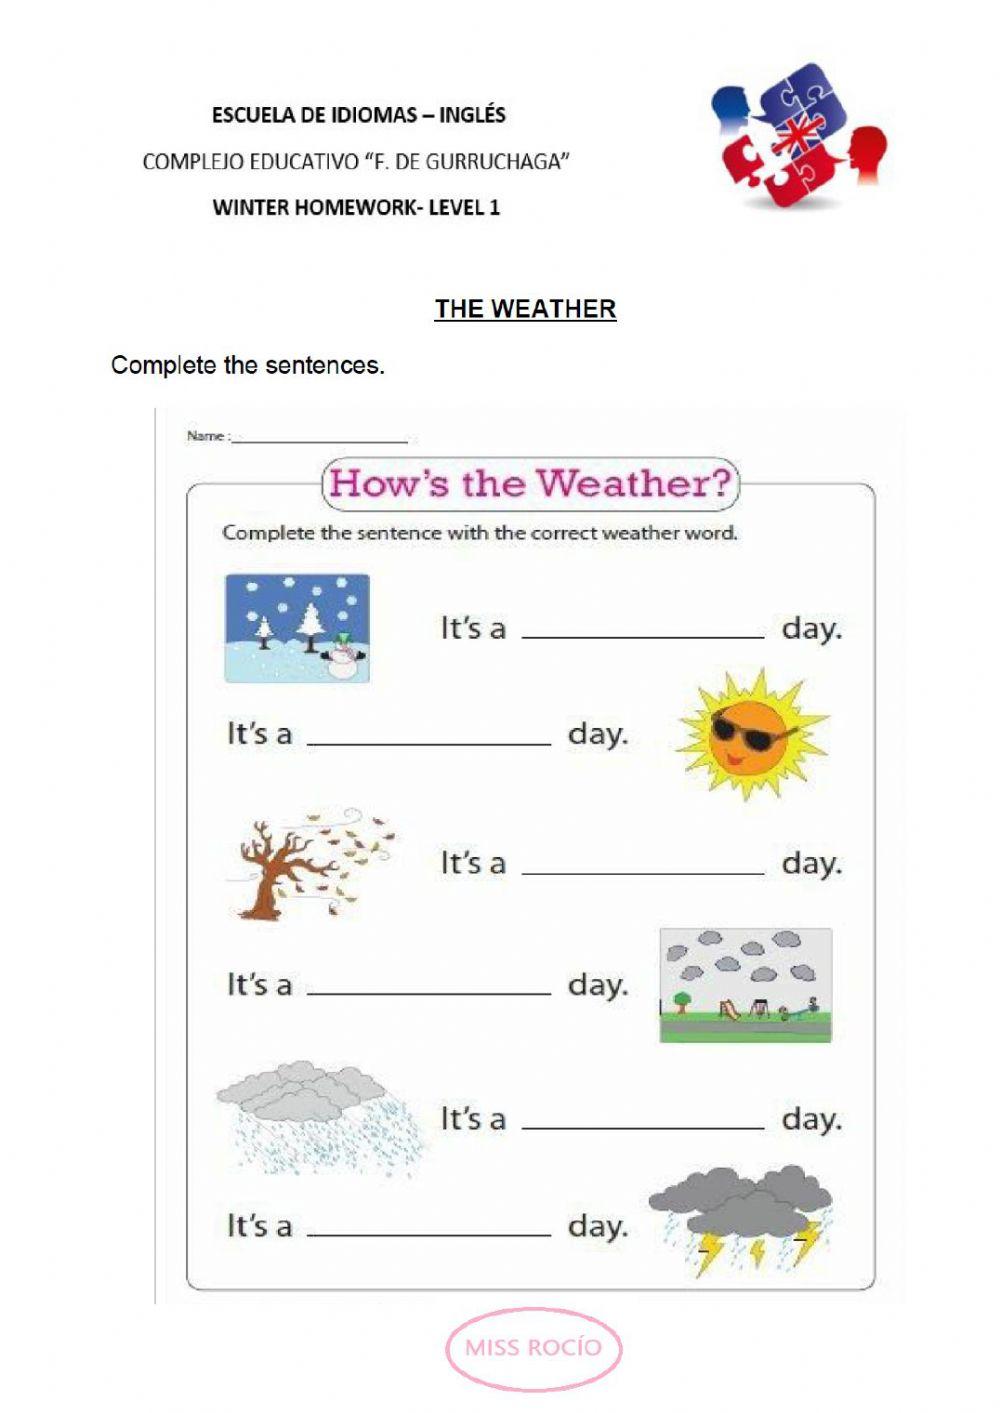 Days of the Week and the Weather